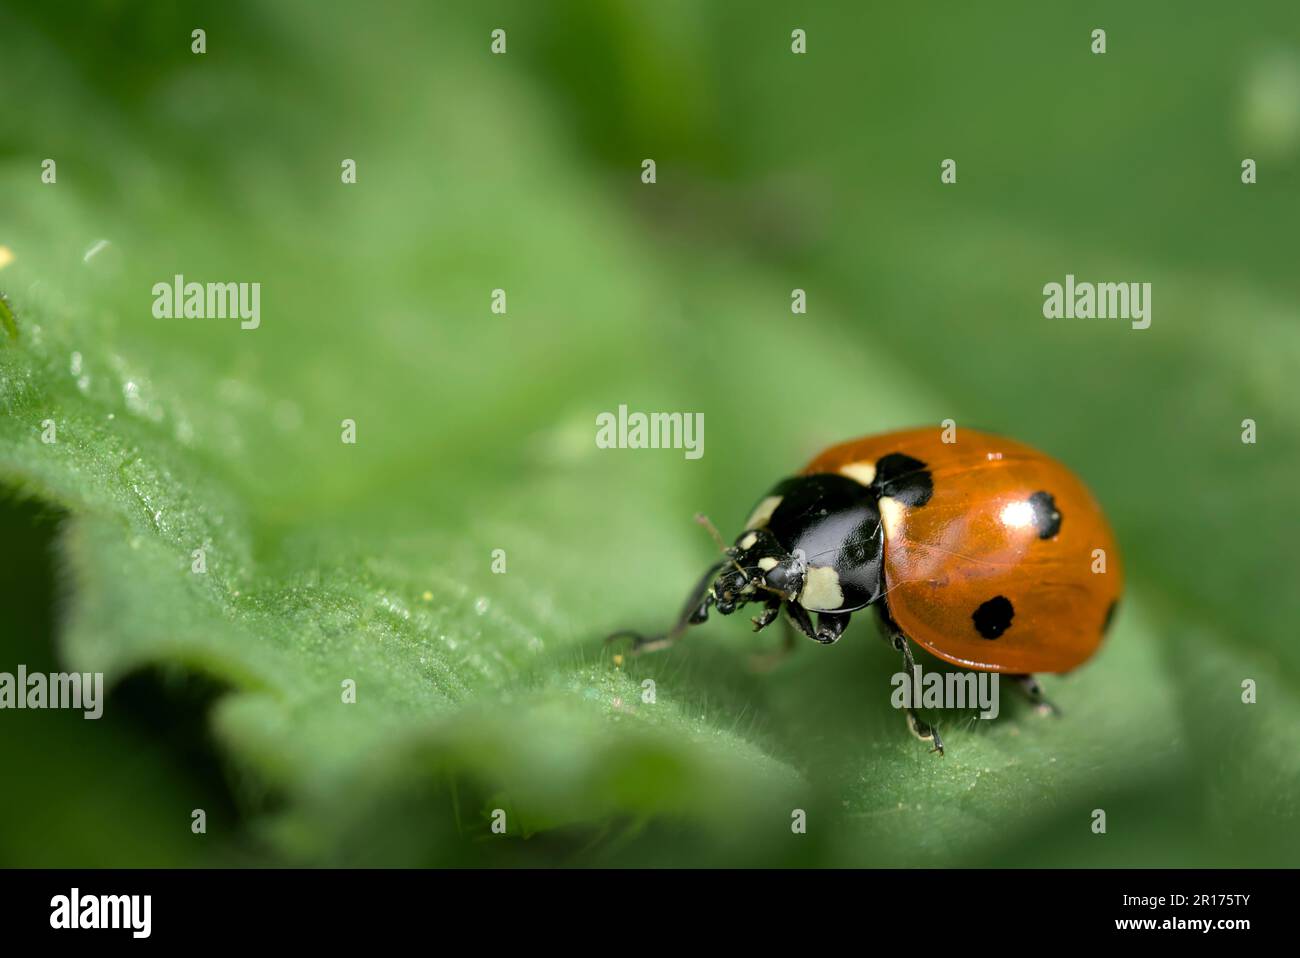 Single Seven-spotted Ladybug (Coccinella septempunctata) cleaning itself up, sitting on a leaf, insects, macro photography, biodiversity, cute Stock Photo